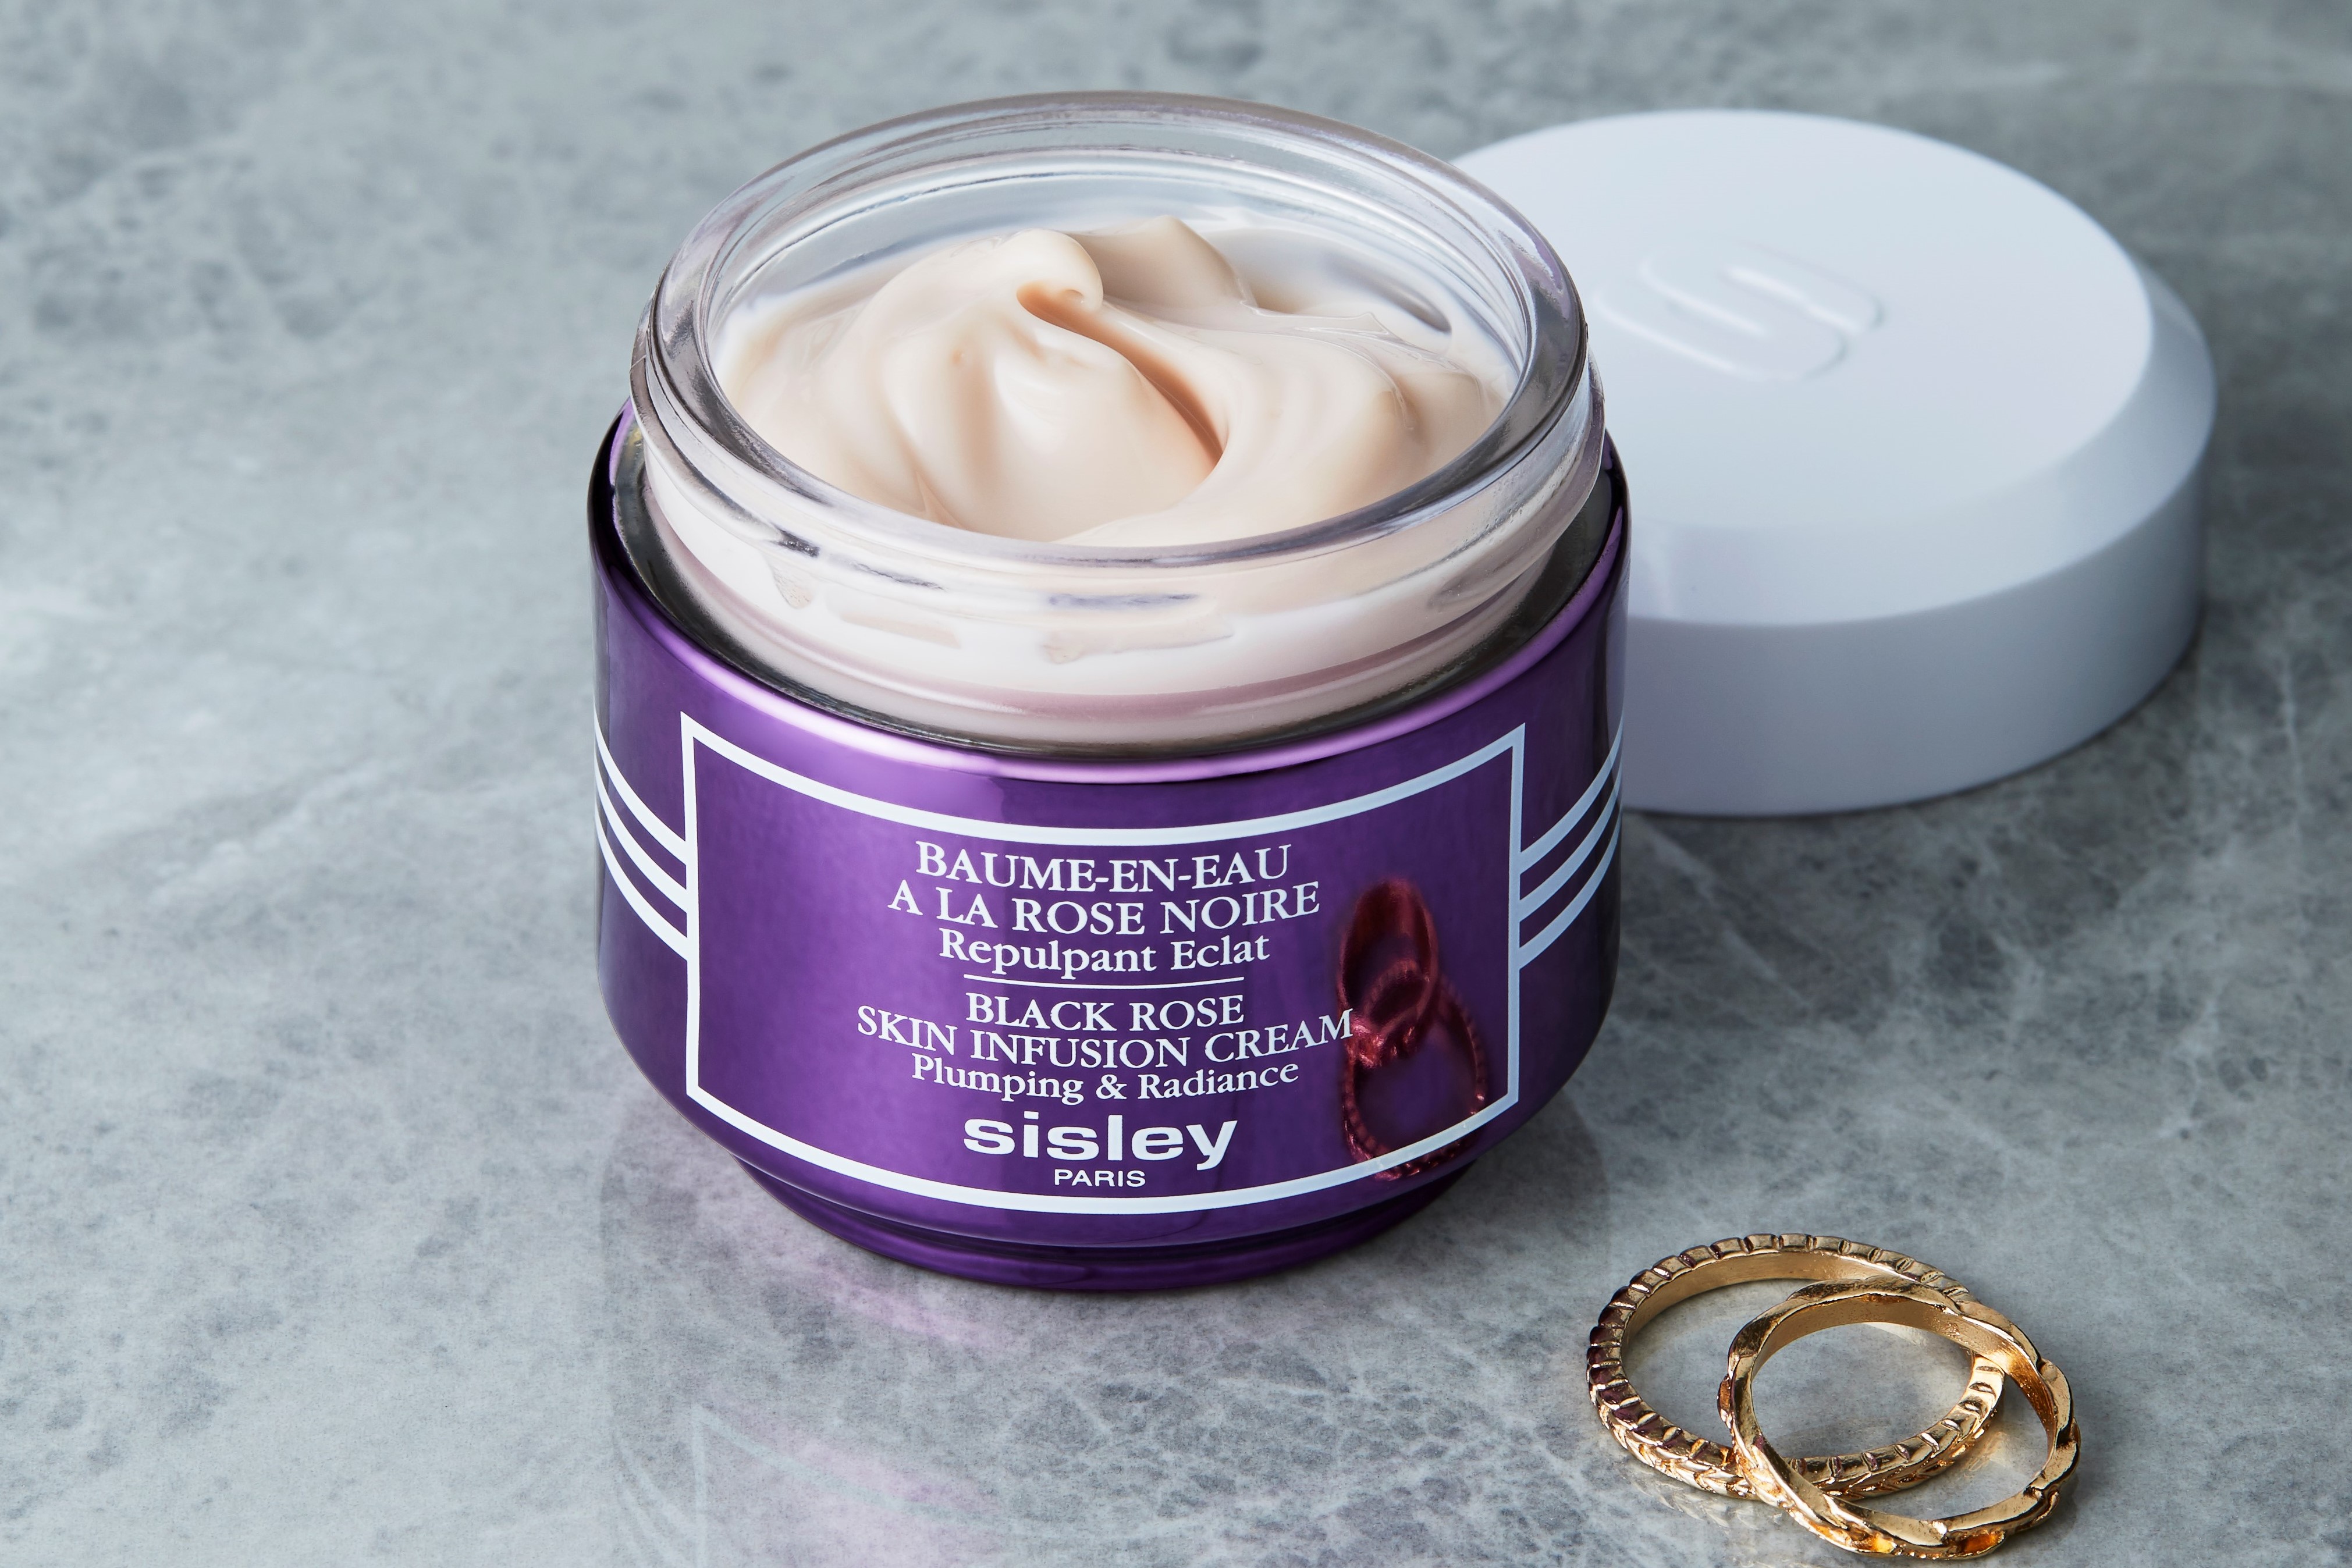 The Sisley-Paris Skincare Products Our Team Loves